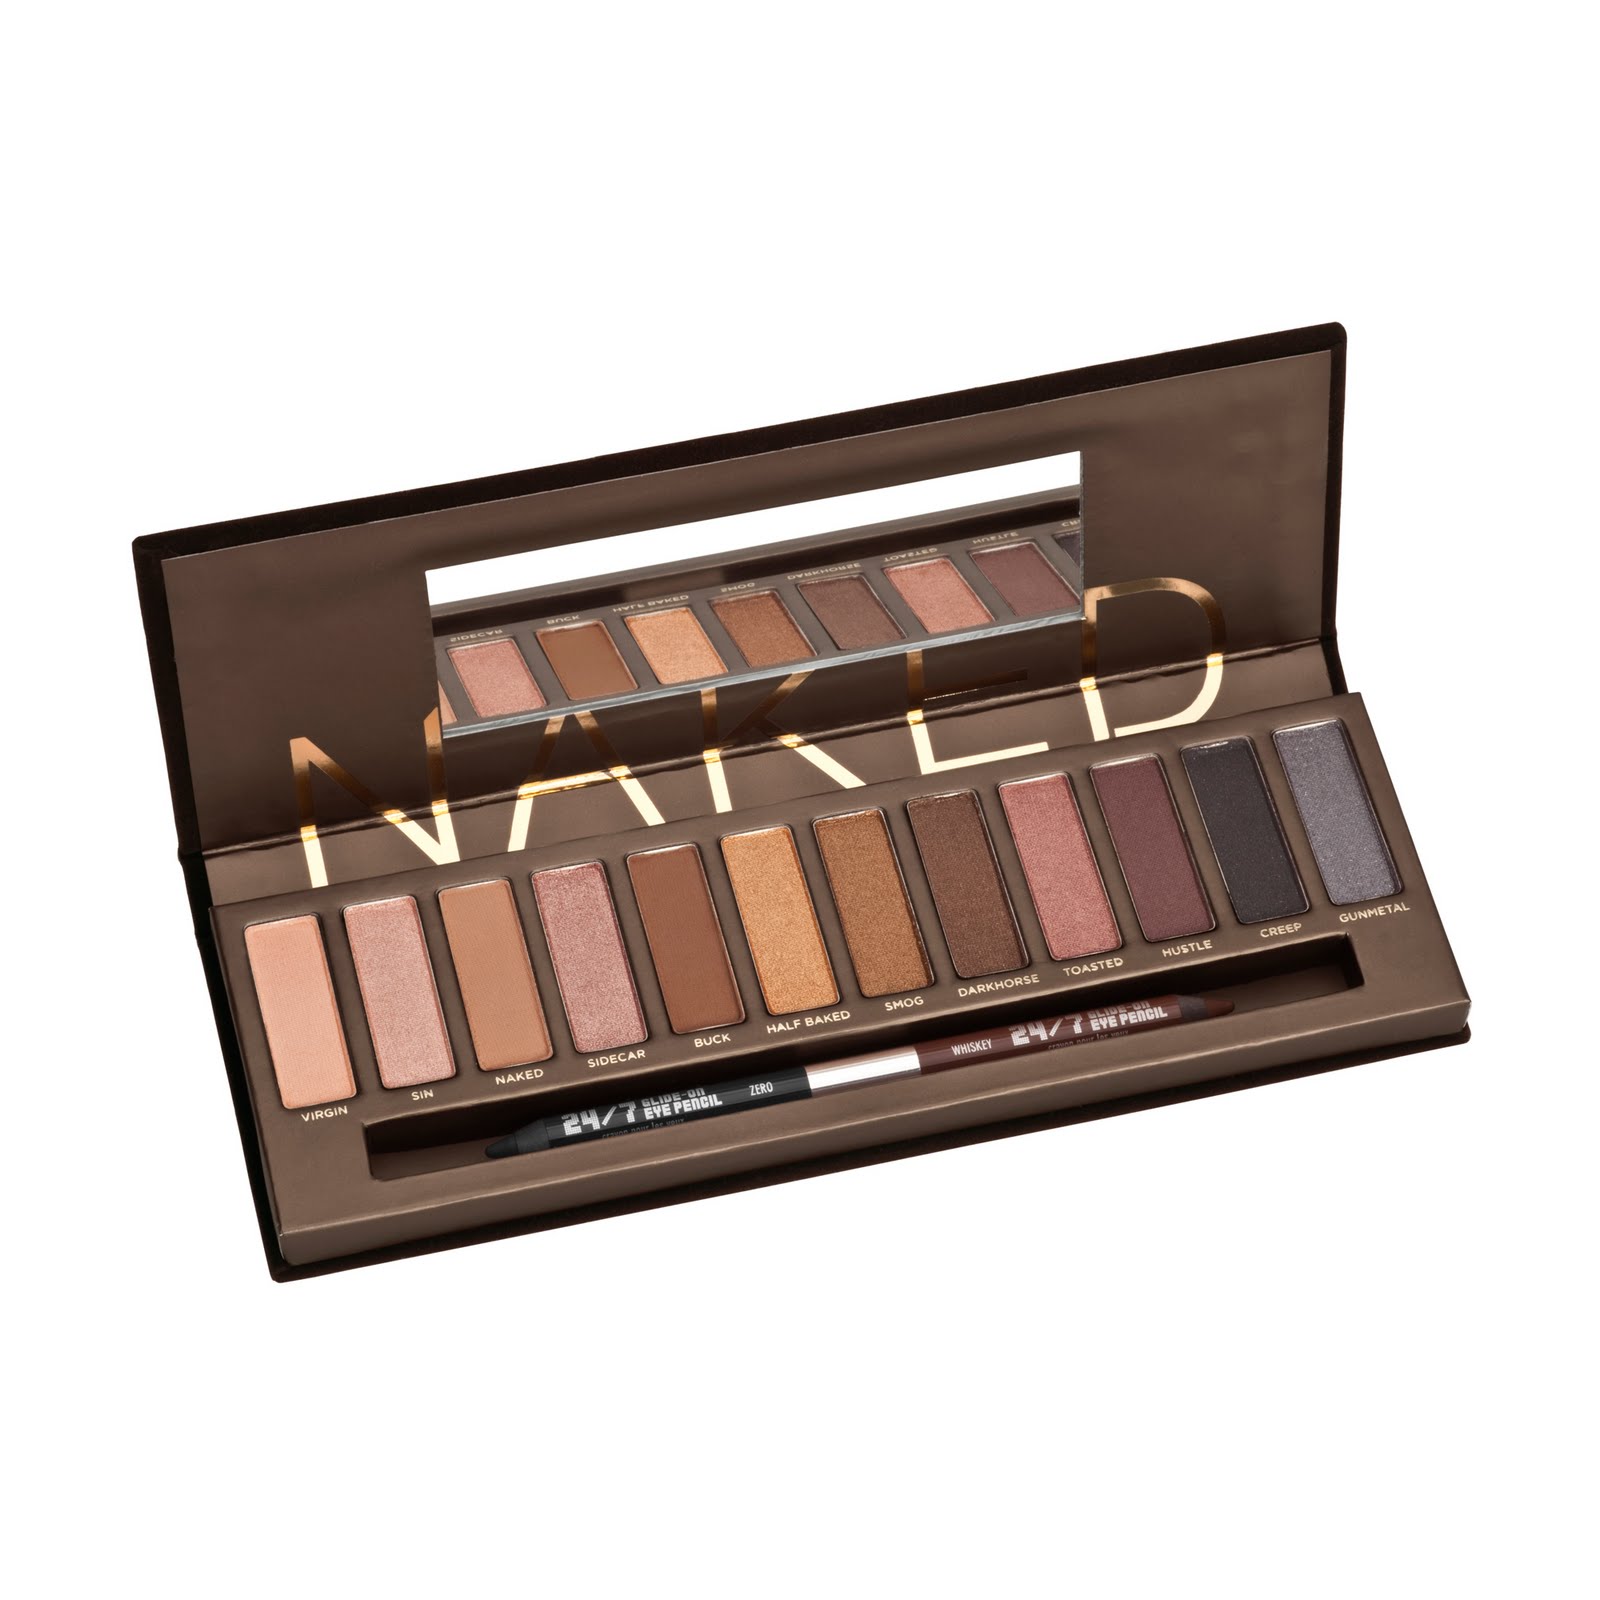 NEW: Urban Decay Naked Smoky Palette Is Available July 8 